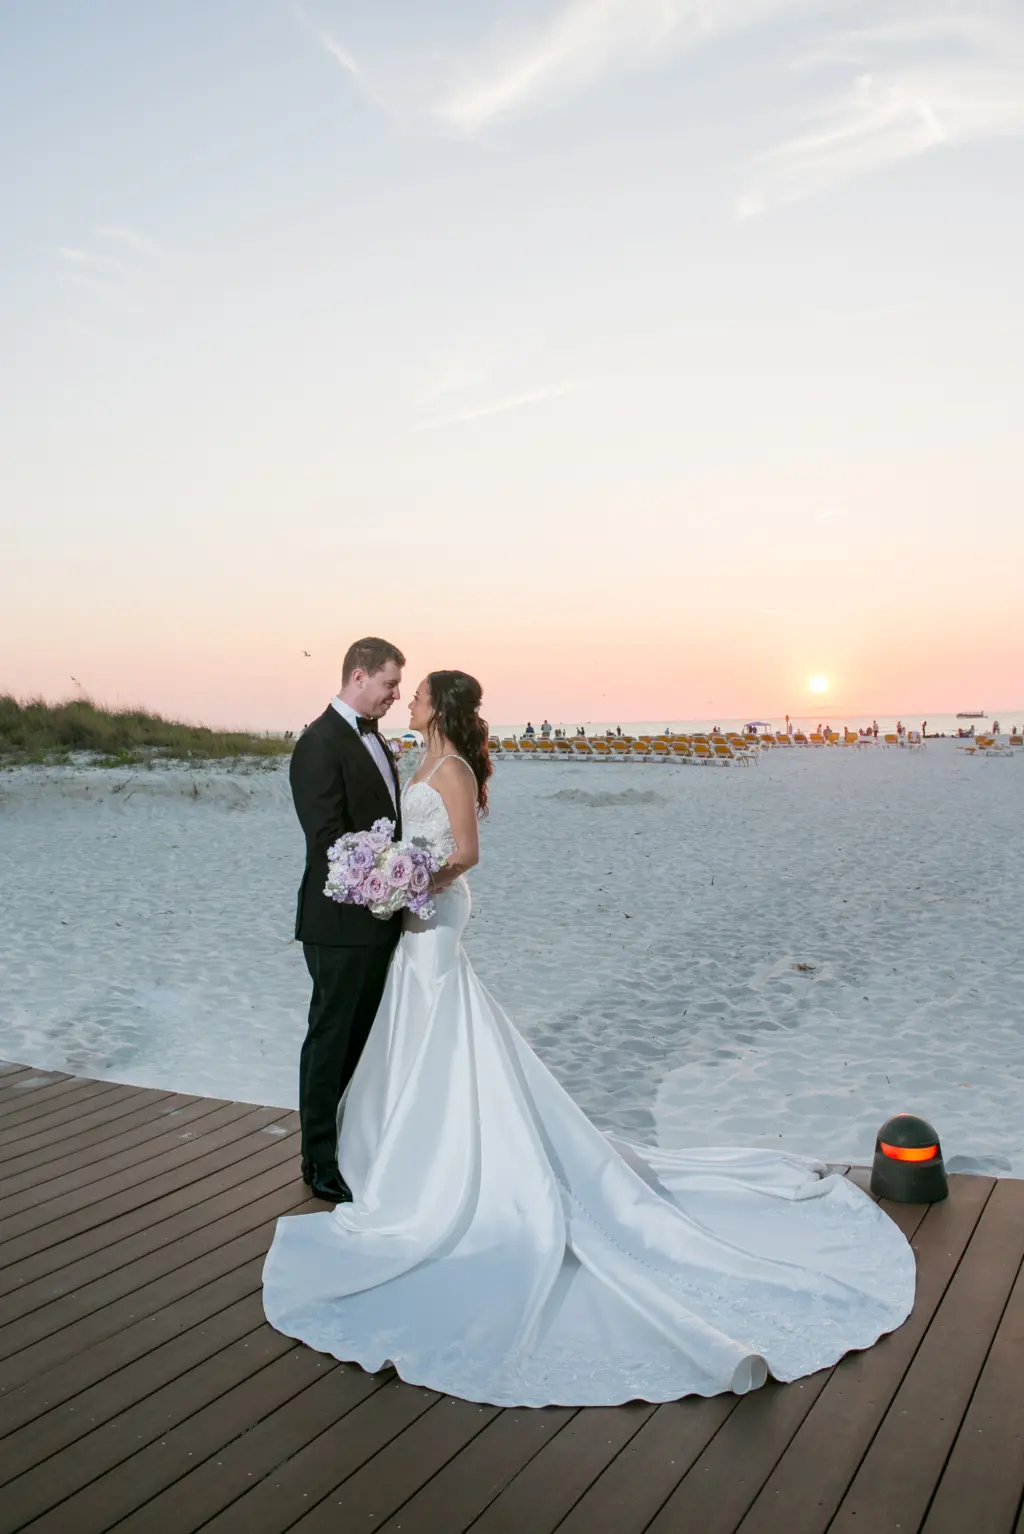 Bride and Groom Sunset Clearwater Beach Wedding Portrait | White Removable Spaghetti Strap Lace and Satin Mermaid Wedding Dress Inspiration | Tampa Bay Boutique Truly Forever Bridal | Tampa Bay Event Venue Sandpearl Resort Hotel | Photographer Carrie Wildes Photography